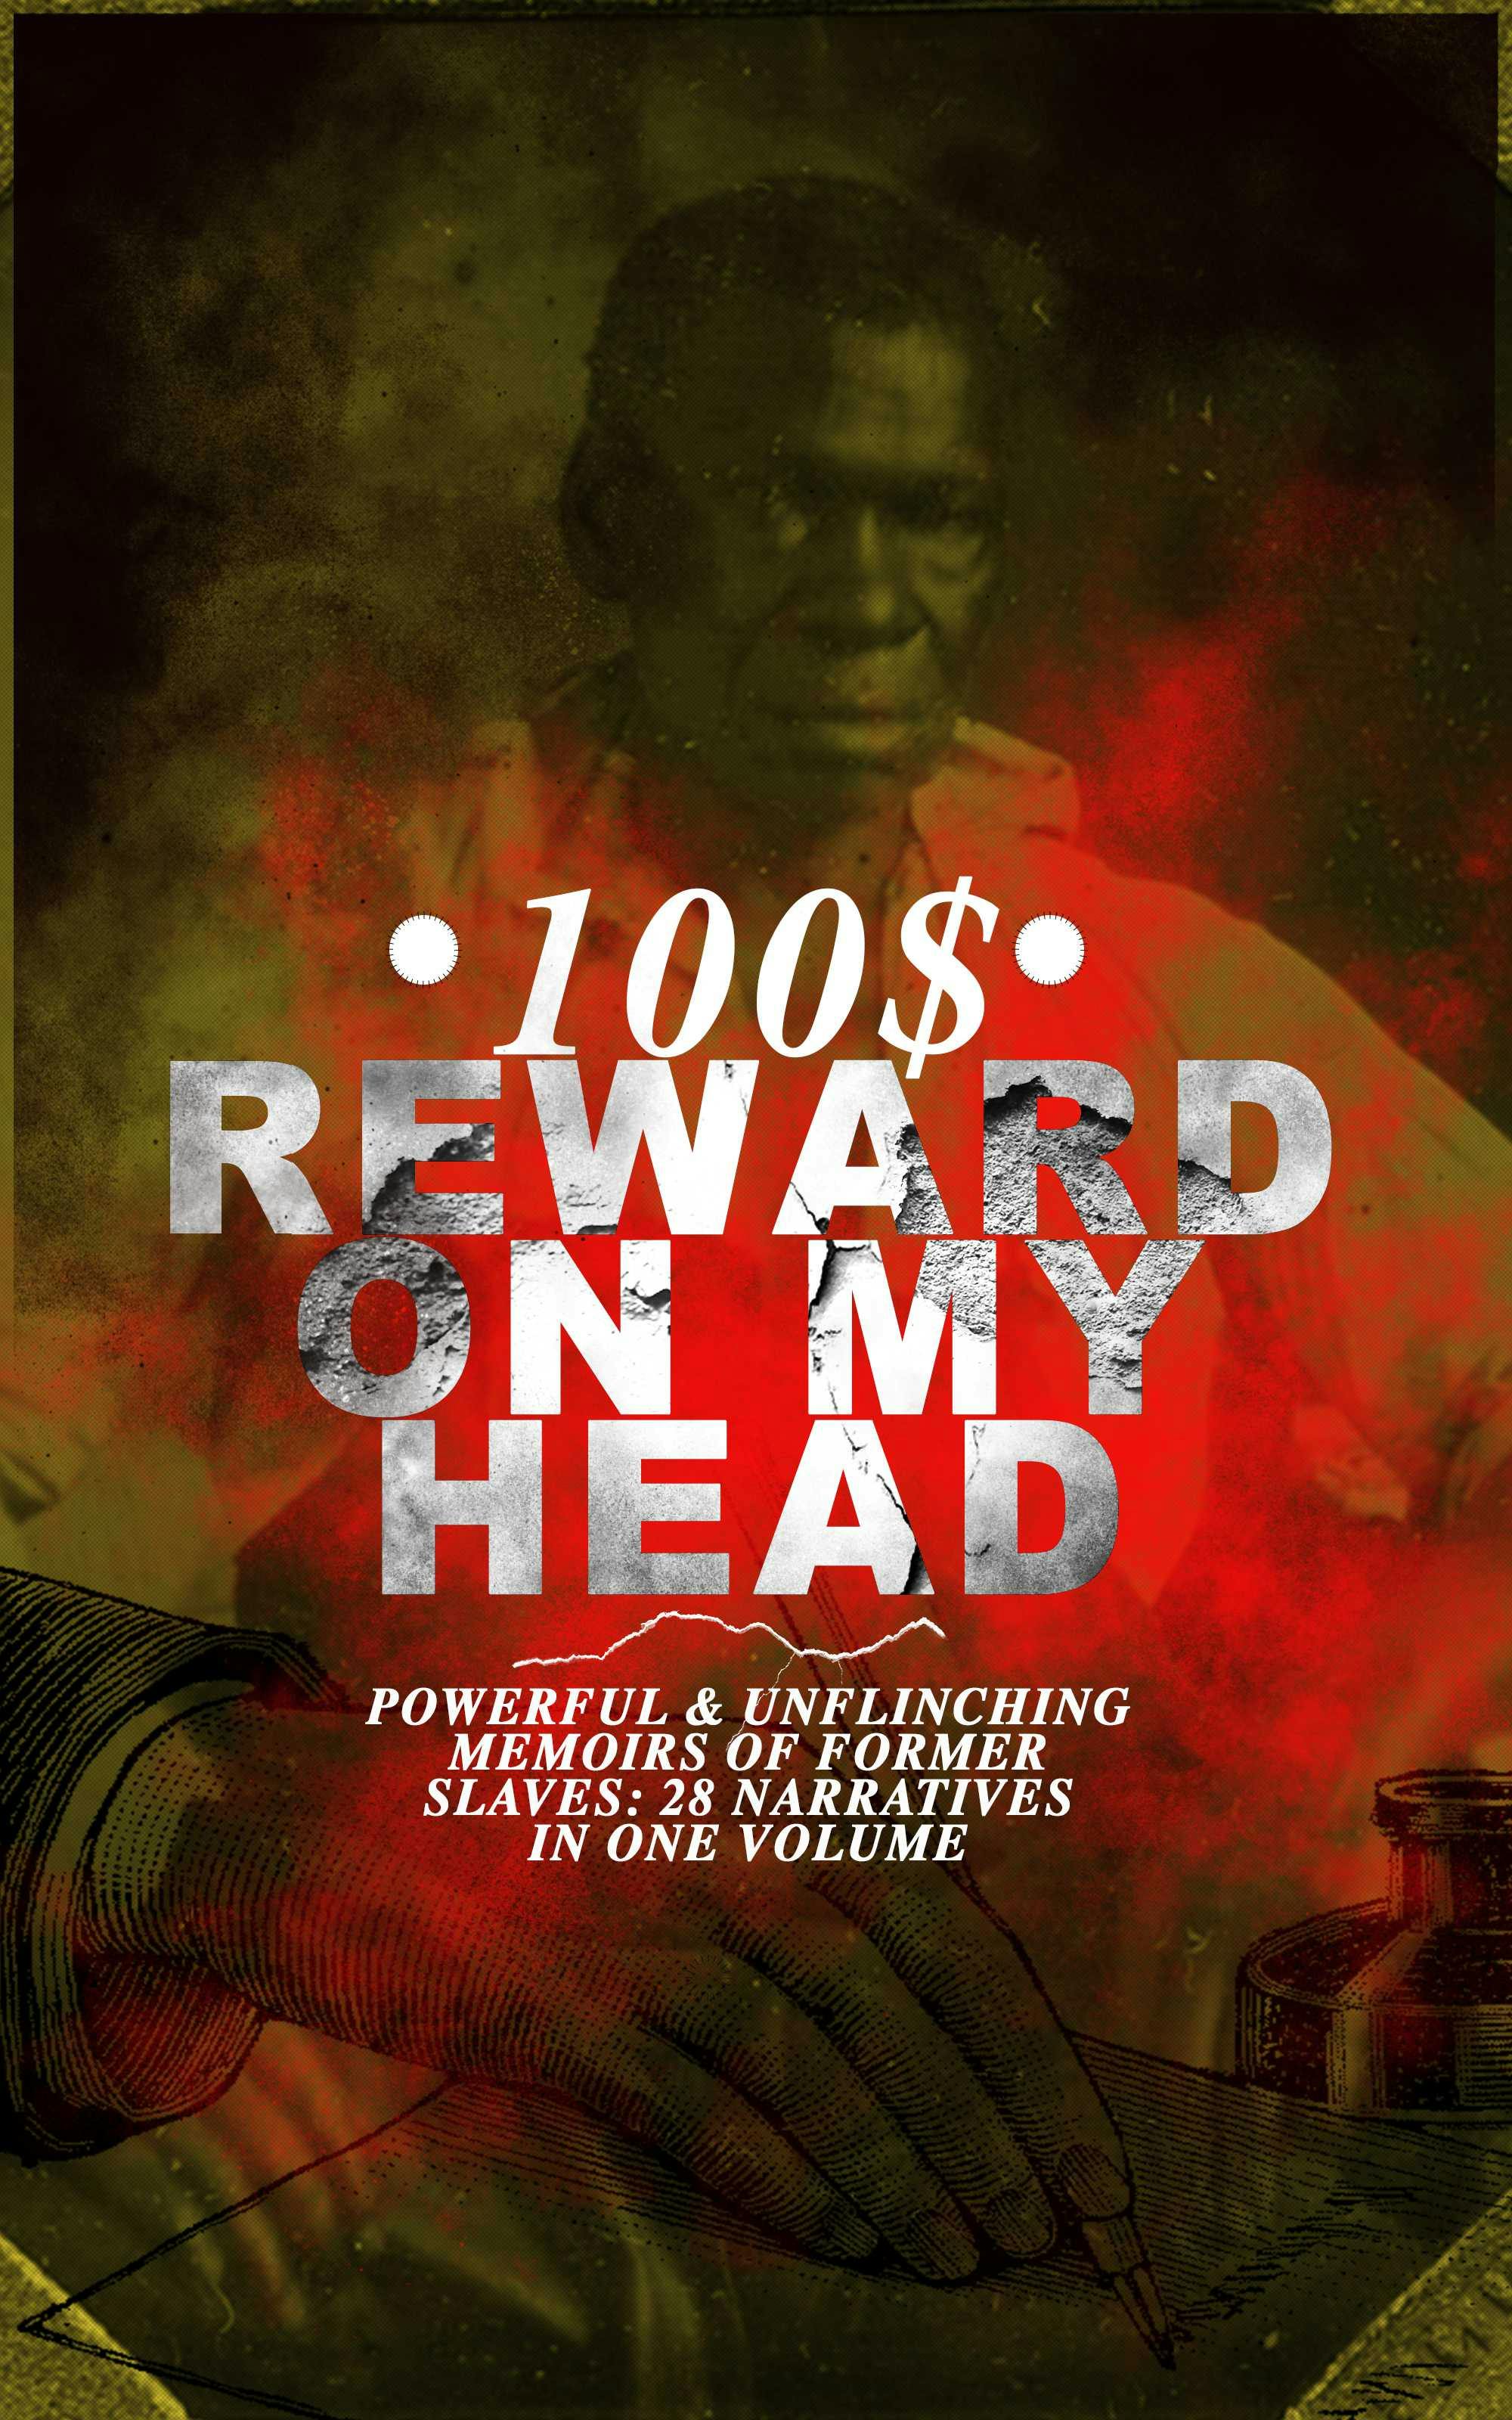 100$ REWARD ON MY HEAD – Powerful & Unflinching Memoirs Of Former Slaves: 28 Narratives in One Volume: With Hundreds of Documented Testimonies & True Life Stories: Memoirs of Frederick Douglass, Underground Railroad, 12 Years a Slave, Incidents in Life of a Slave Girl, Narrative of Sojourner Truth... - undefined